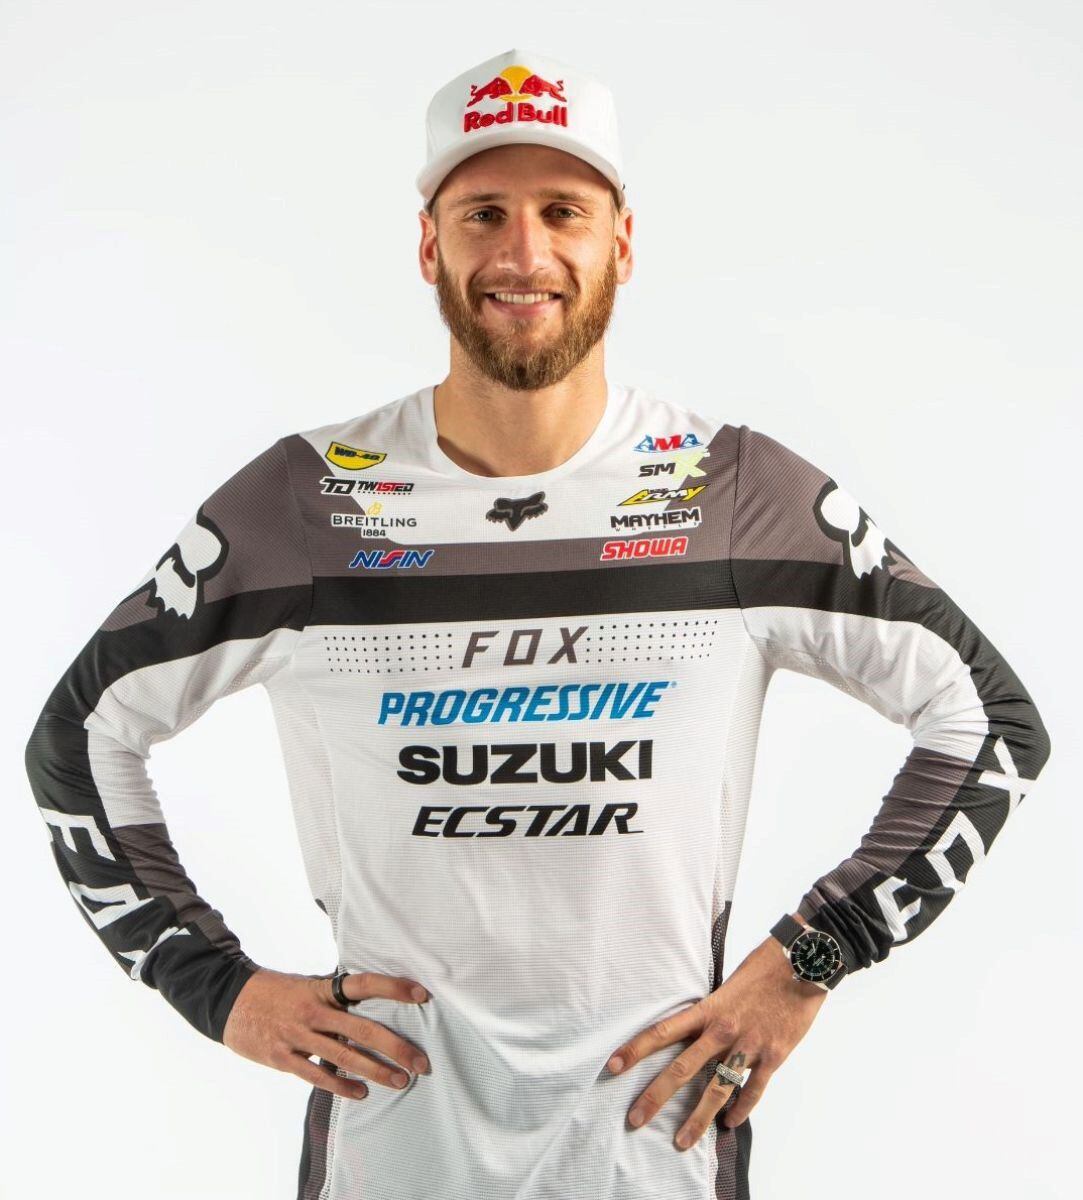 “For supercross to grow as a sport around the world, I think it’s really important that more riders focus solely on the discipline, which is why I’m concentrating on the World Supercross Championship and the AMA Supercross Championship in the coming years. I feel like my riding this year has been as good as ever, and I’m excited to see what I can do when focusing on one speciality.” <i>—Ken Roczen, Progressive Insurance Ecstar Suzuki</i>